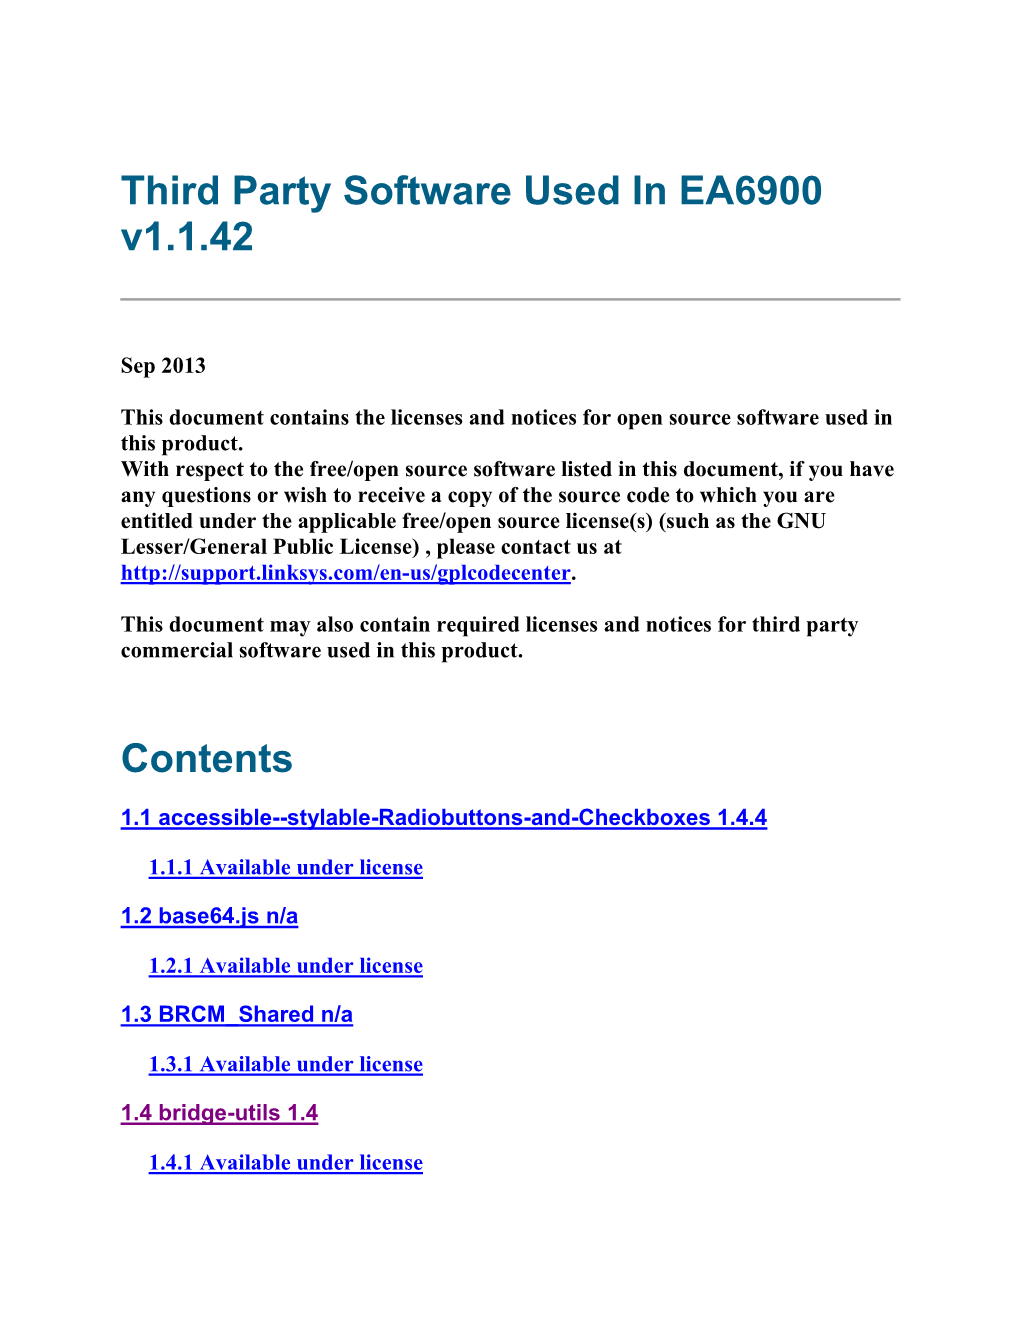 Third Party Software Used in EA6900 V1.1.42